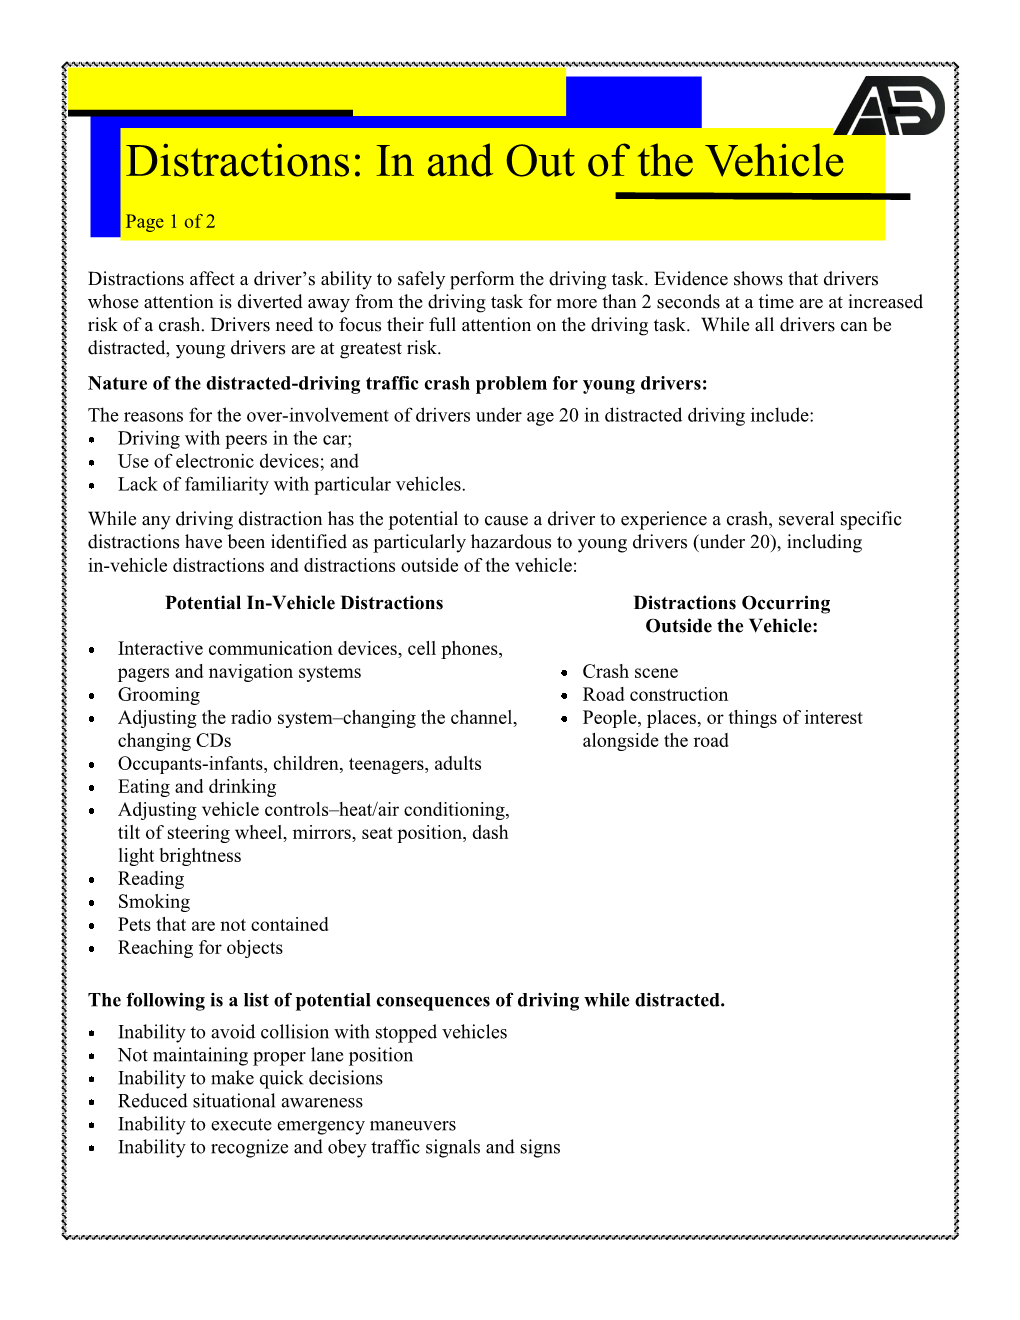 Distractions: in and out of the Vehicle